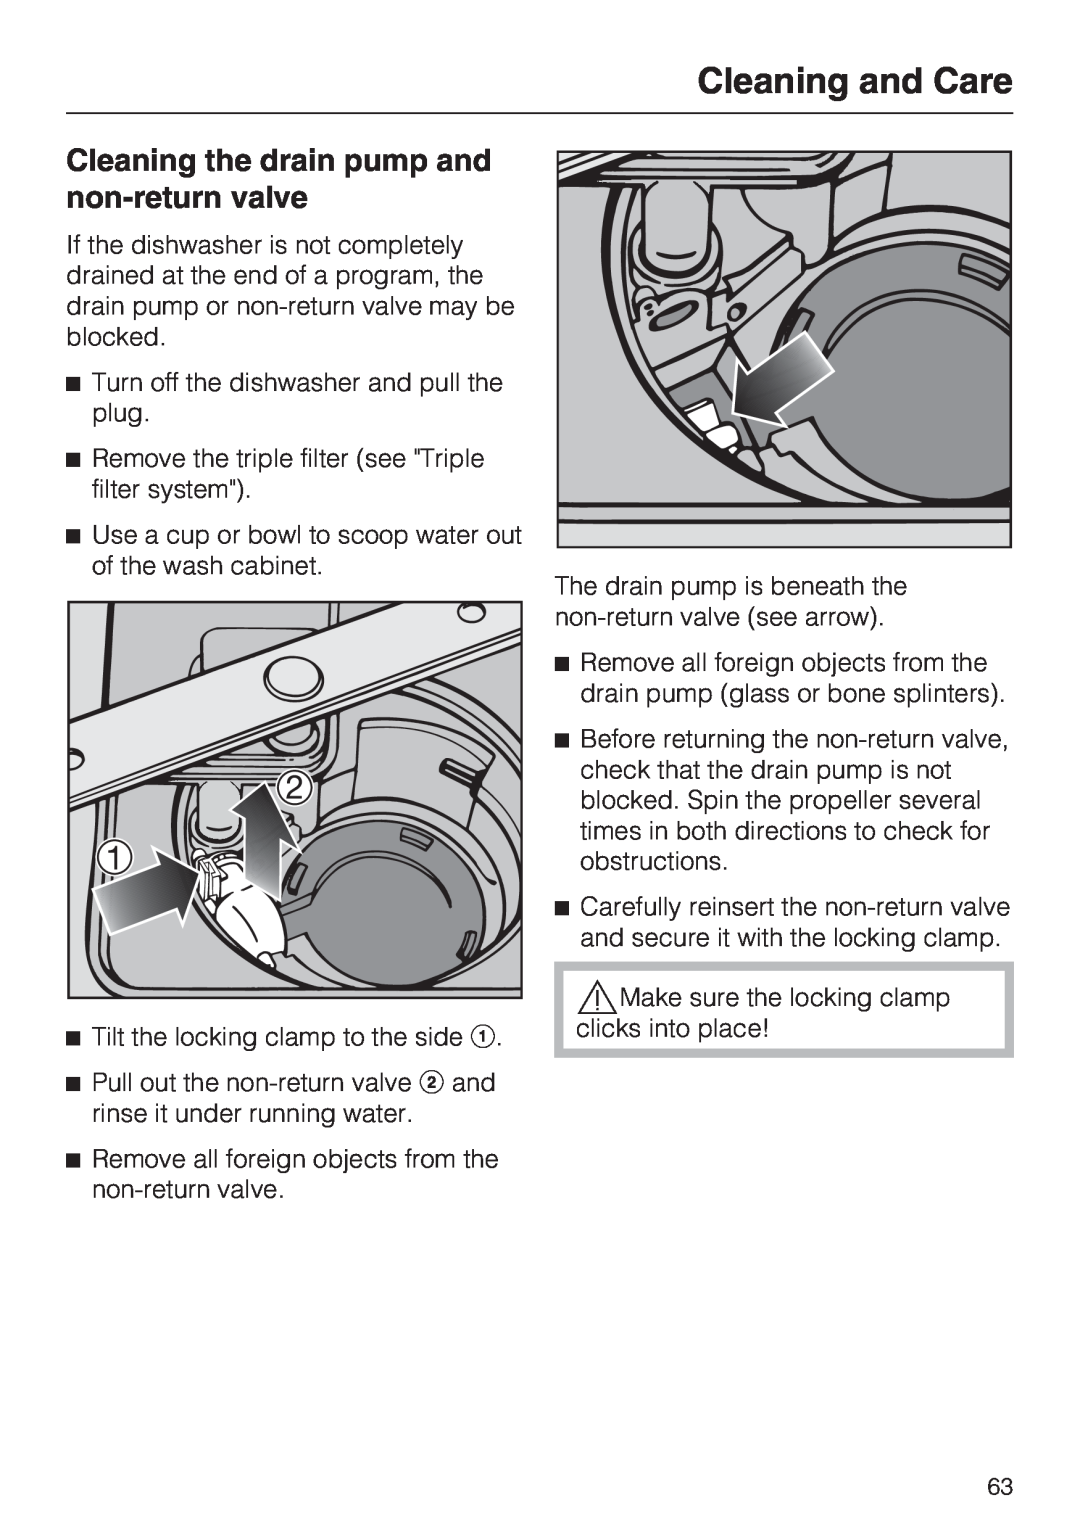 Miele G 5770, G 5775 manual Cleaning the drain pump and non-returnvalve, Cleaning and Care 